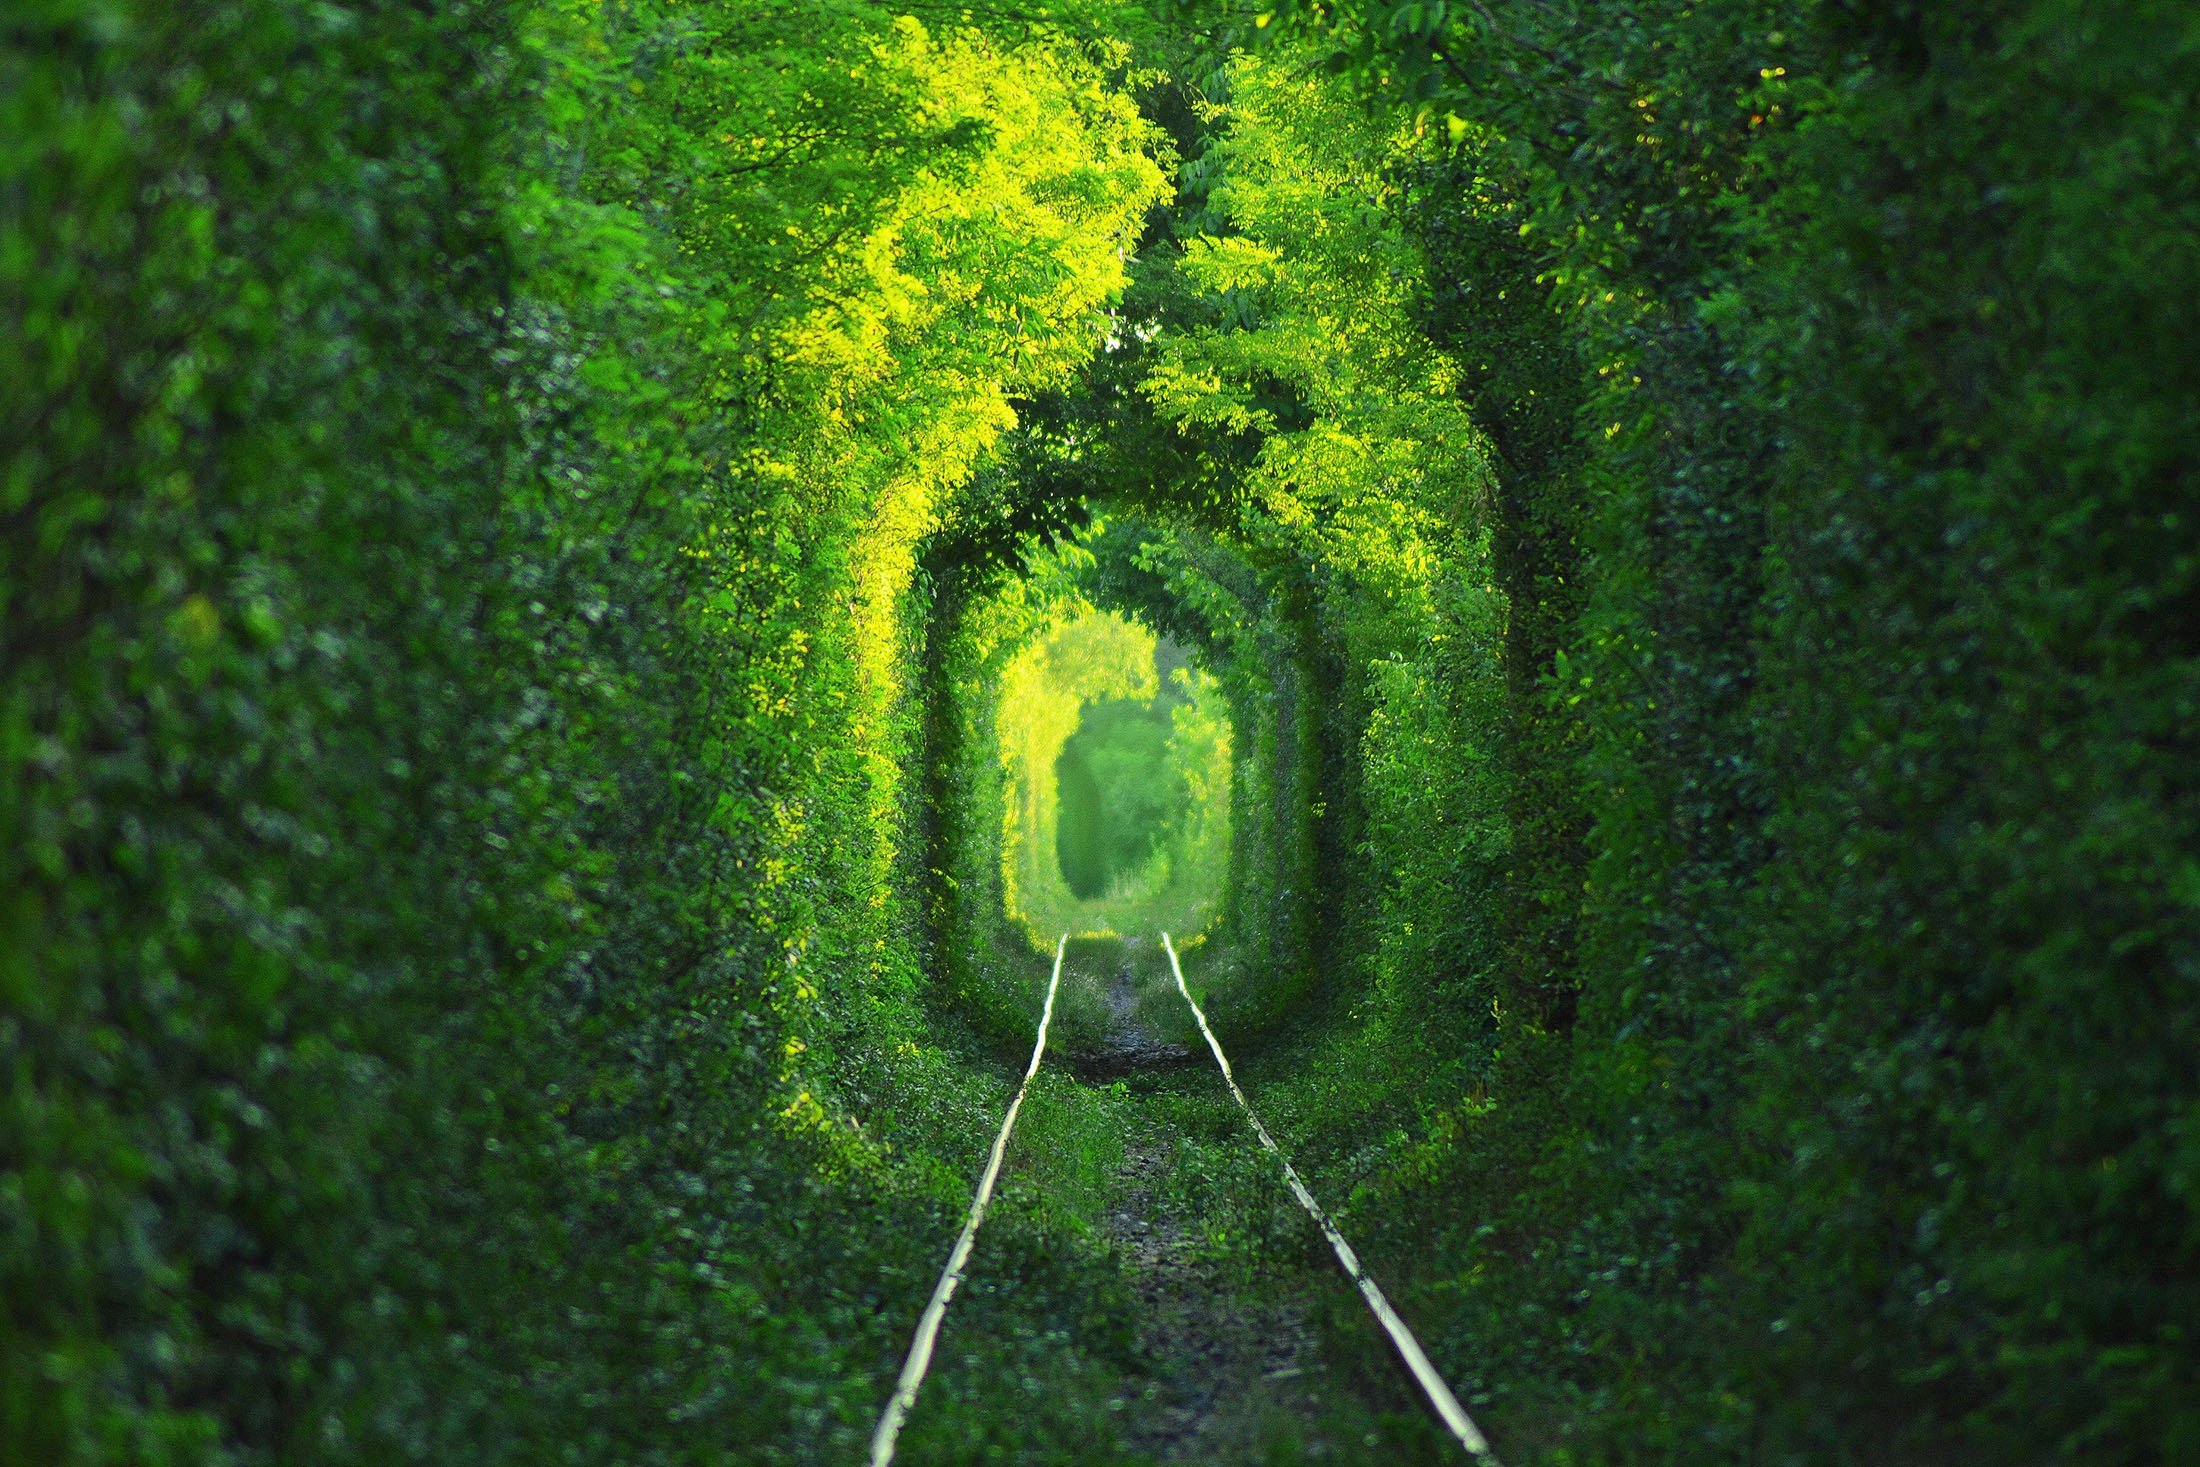 The Tunnel of Love is a section of industrial railway located near Klevan, Ukraine, that links it with Orzhiv, surrounded by green arches. (Shutterstock Photo)